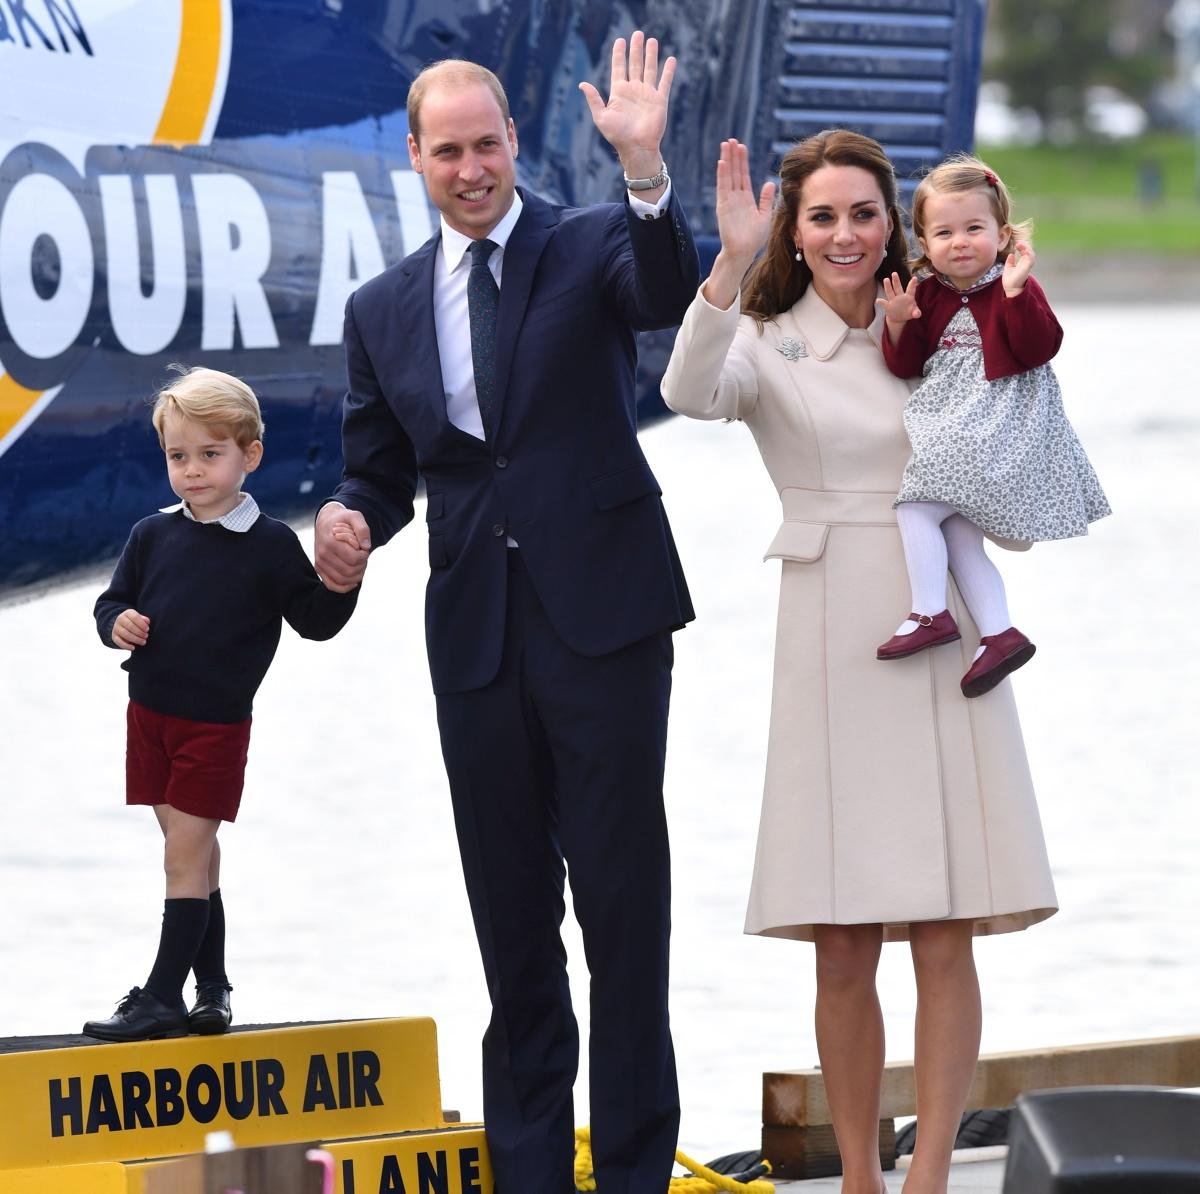 2016 Royal Tour Canada Duke and Duchess of Cambridge Google image from http://assets.nydailynews.com/polopoly_fs/1.2814690.1475423907!/img/httpImage/image.jpg_gen/derivatives/gallery_1200/2016-royal-tour-canada-duke-duchess-cambridge-victoria.jpg